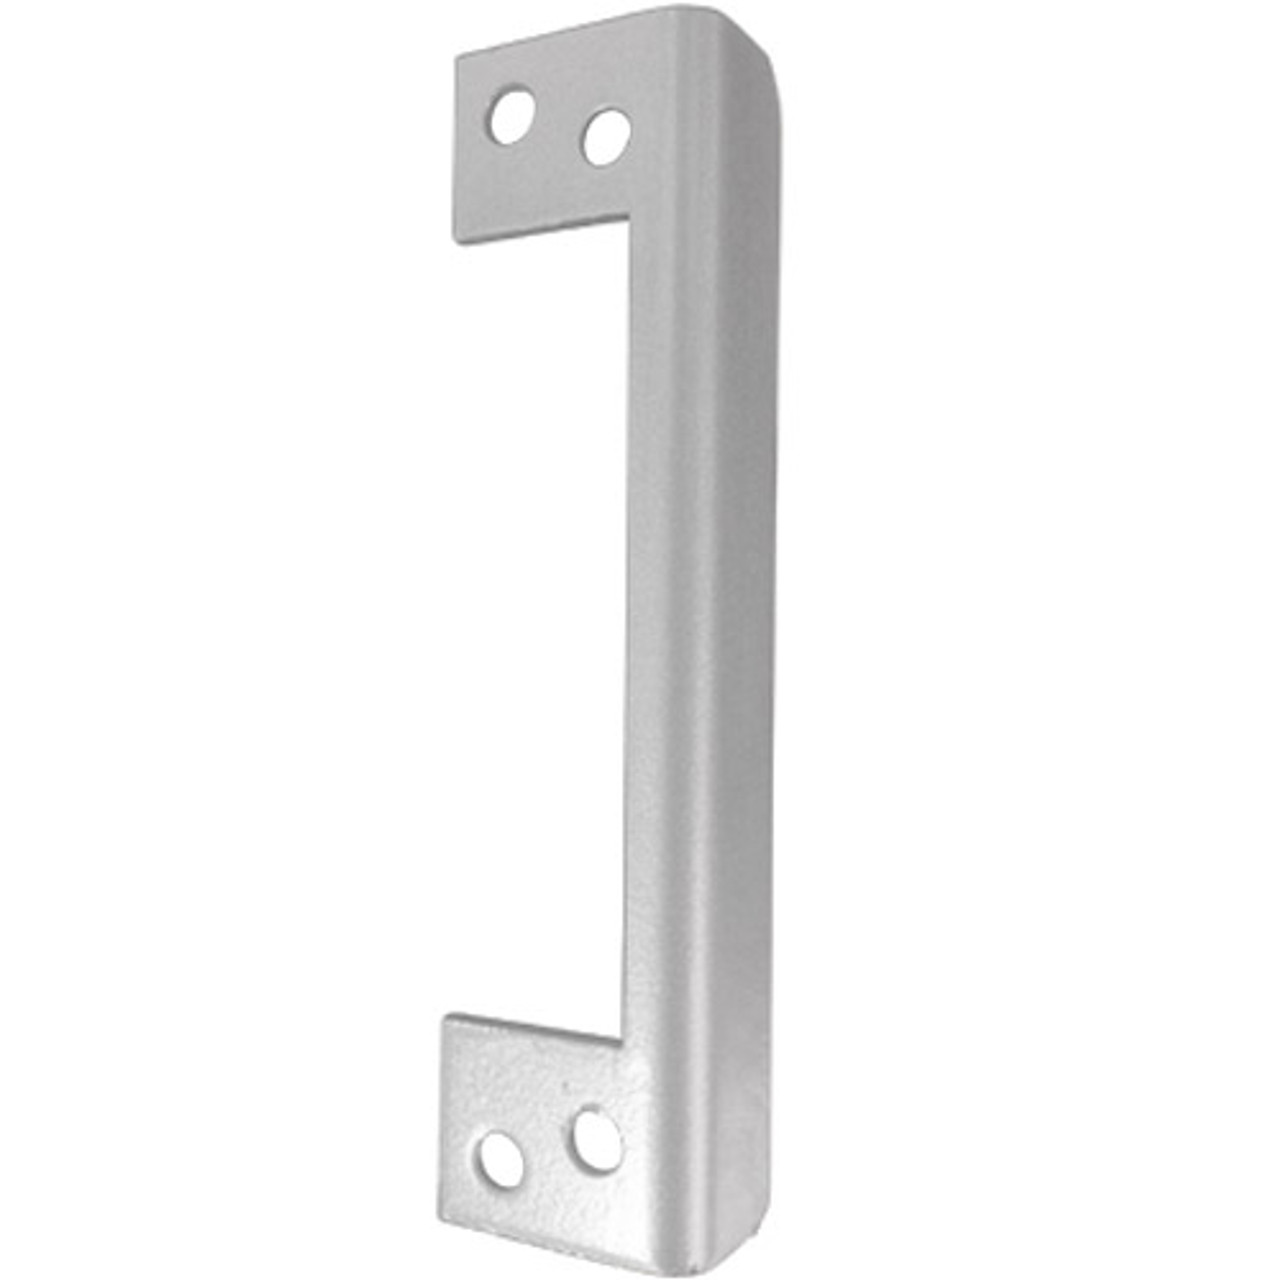 ALP-210-SL Don Jo Latch Protector in Silver Coated Finish